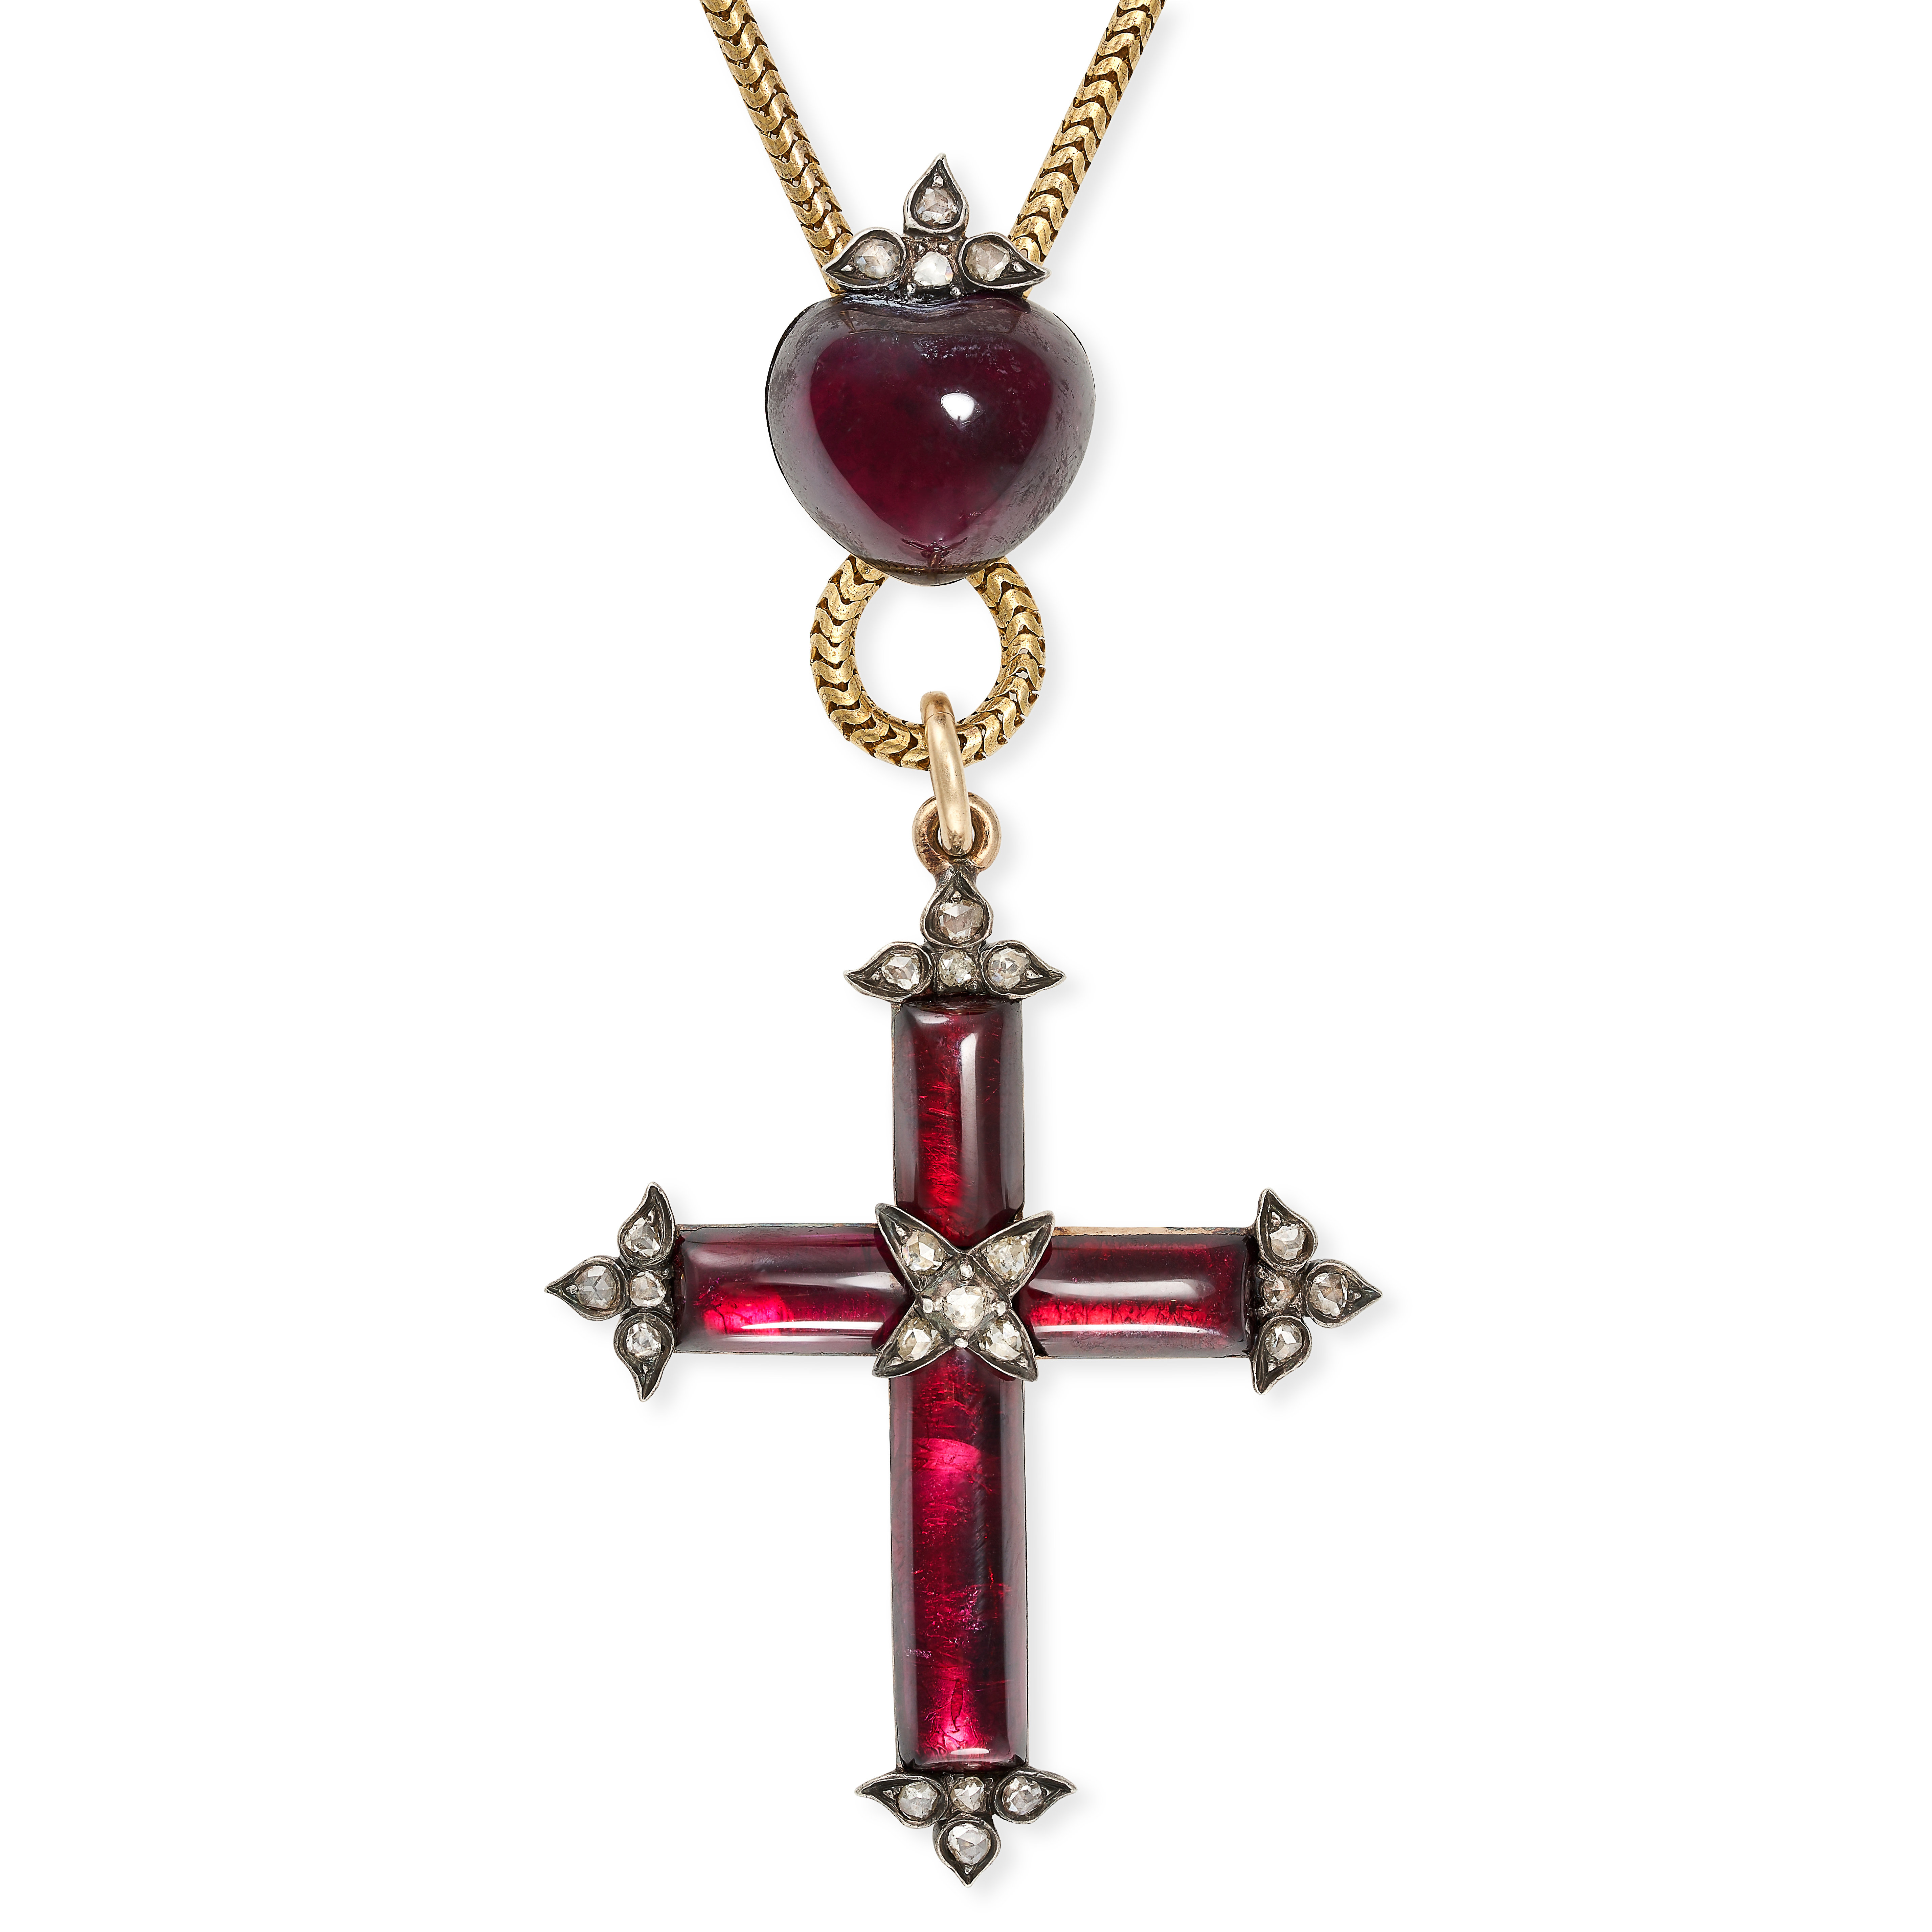 AN ANTIQUE GARNET CROSS PENDANT NECKLACE, 19TH CENTURY in yellow gold and silver, the pendant in the